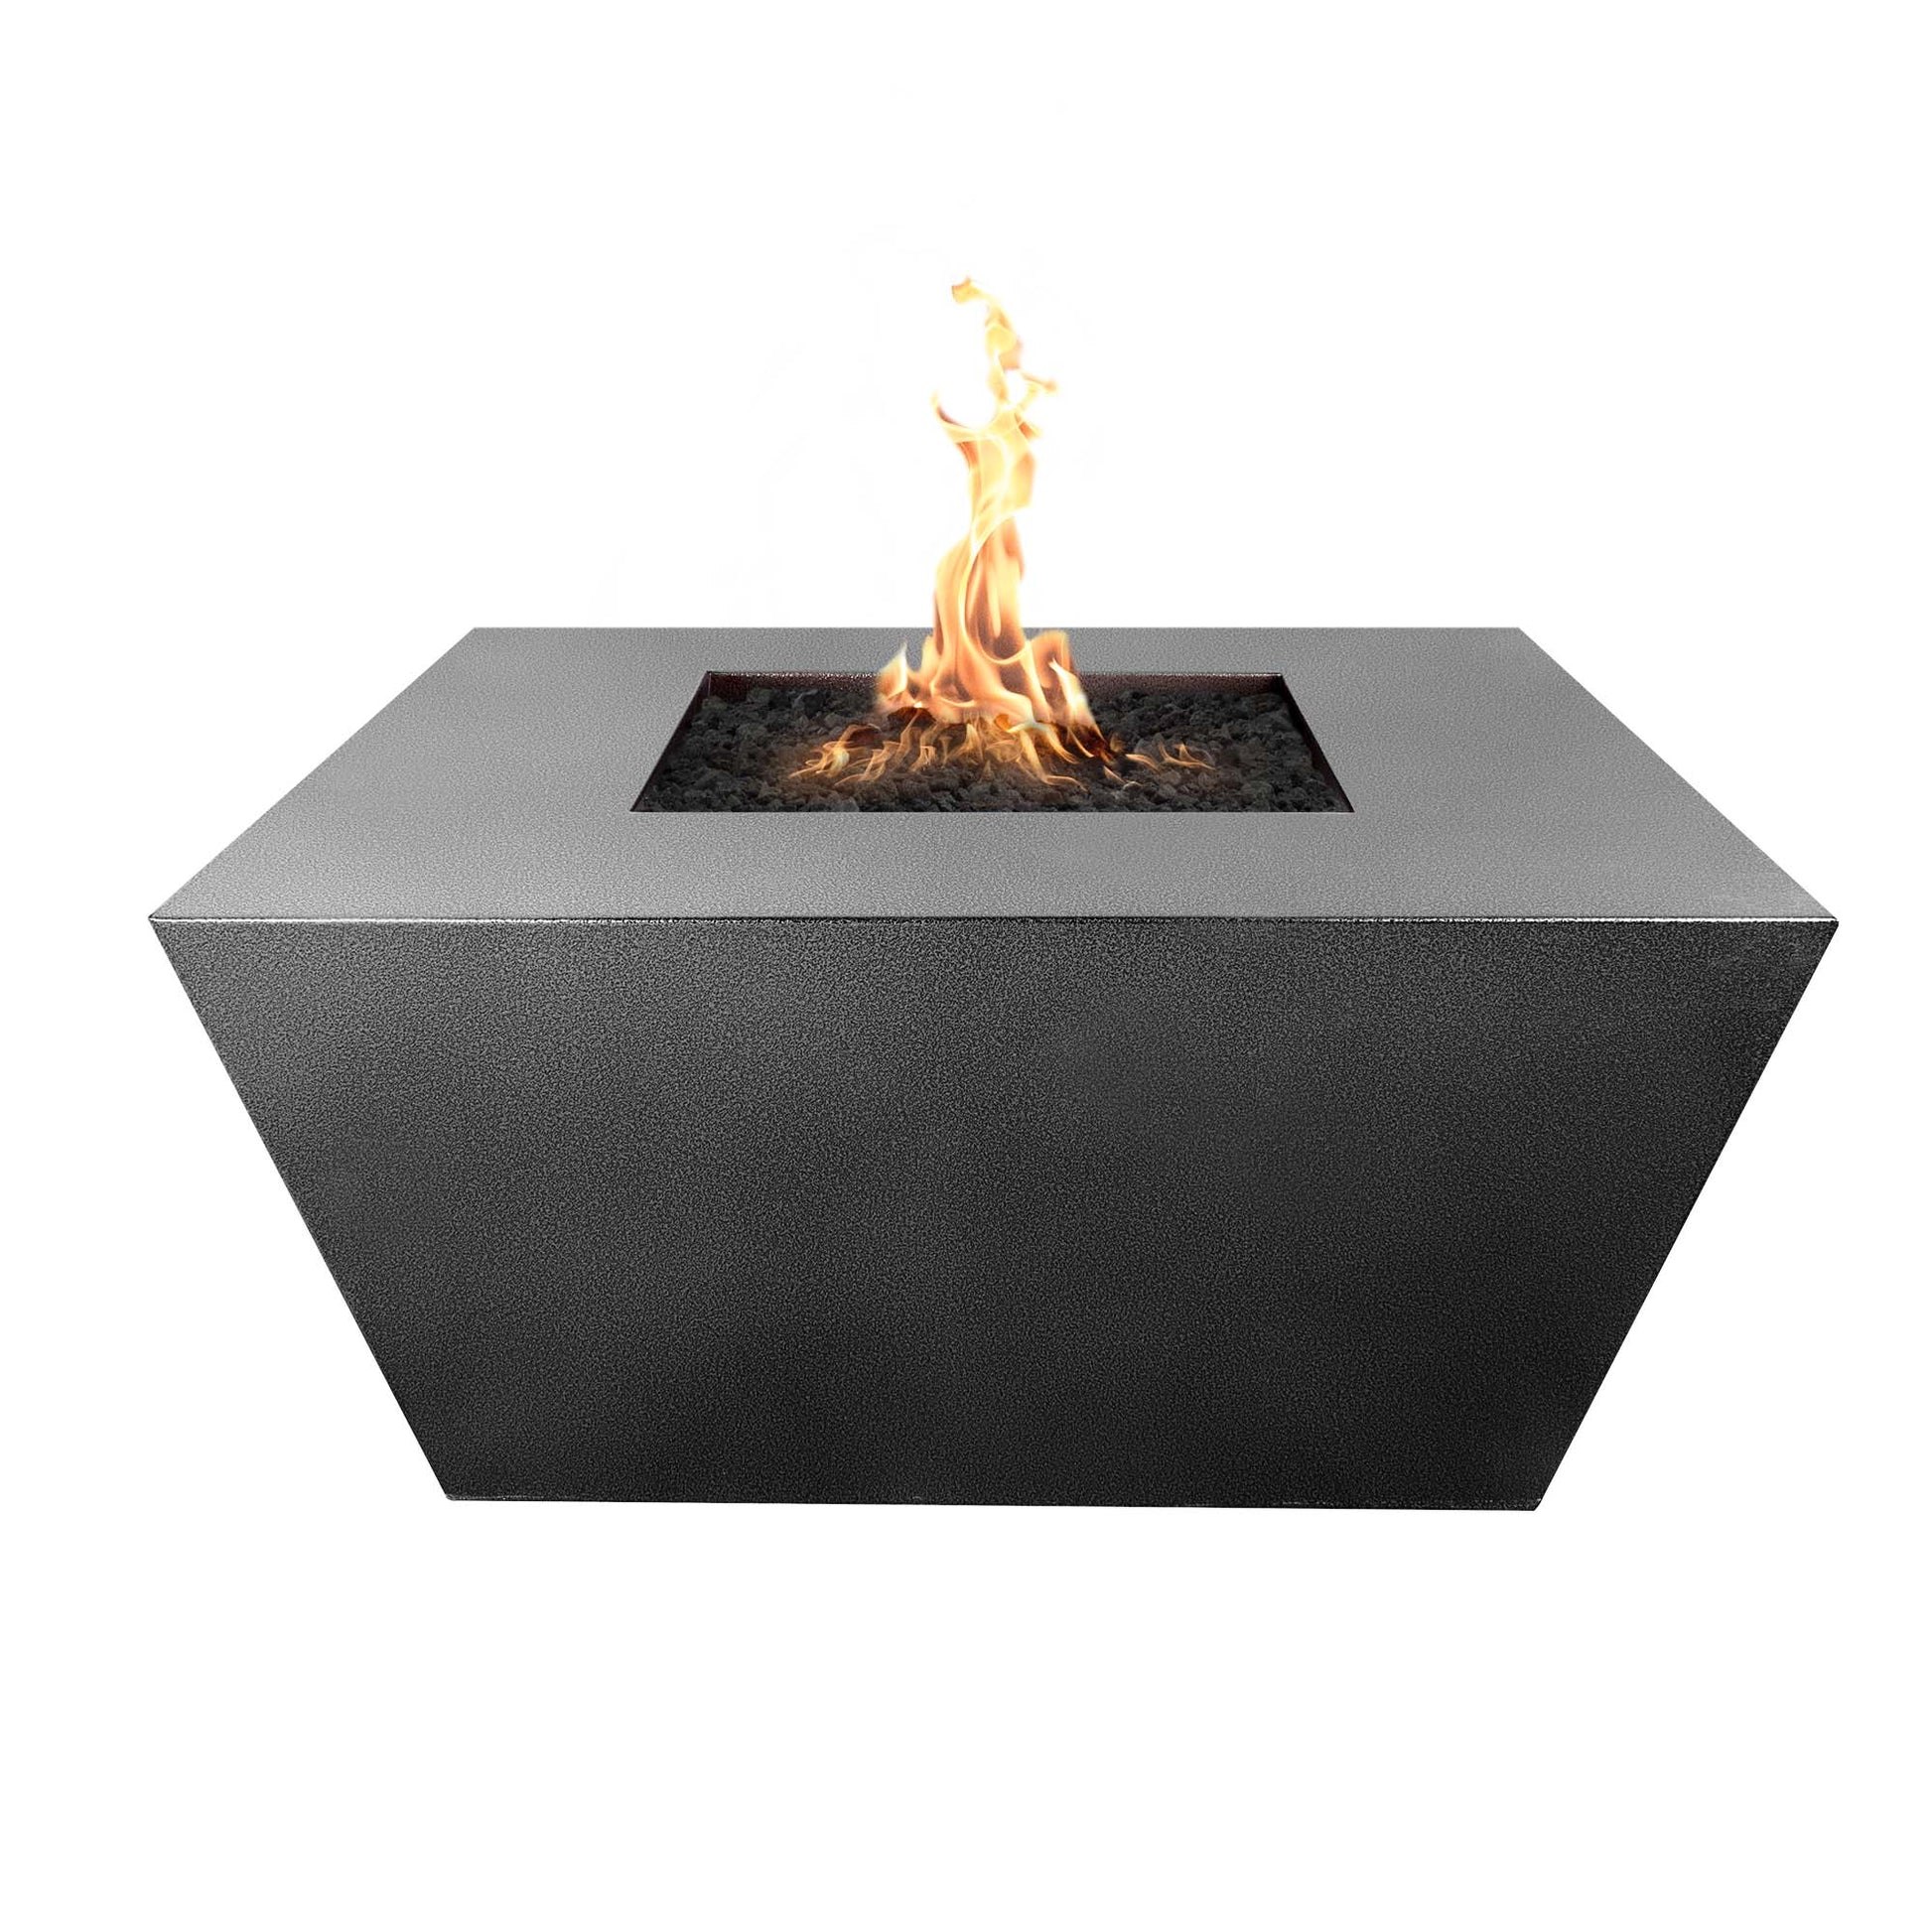 The Outdoor Plus Square Redan 36" Stainless Steel Liquid Propane Fire Pit with Match Lit with Flame Sense Ignition